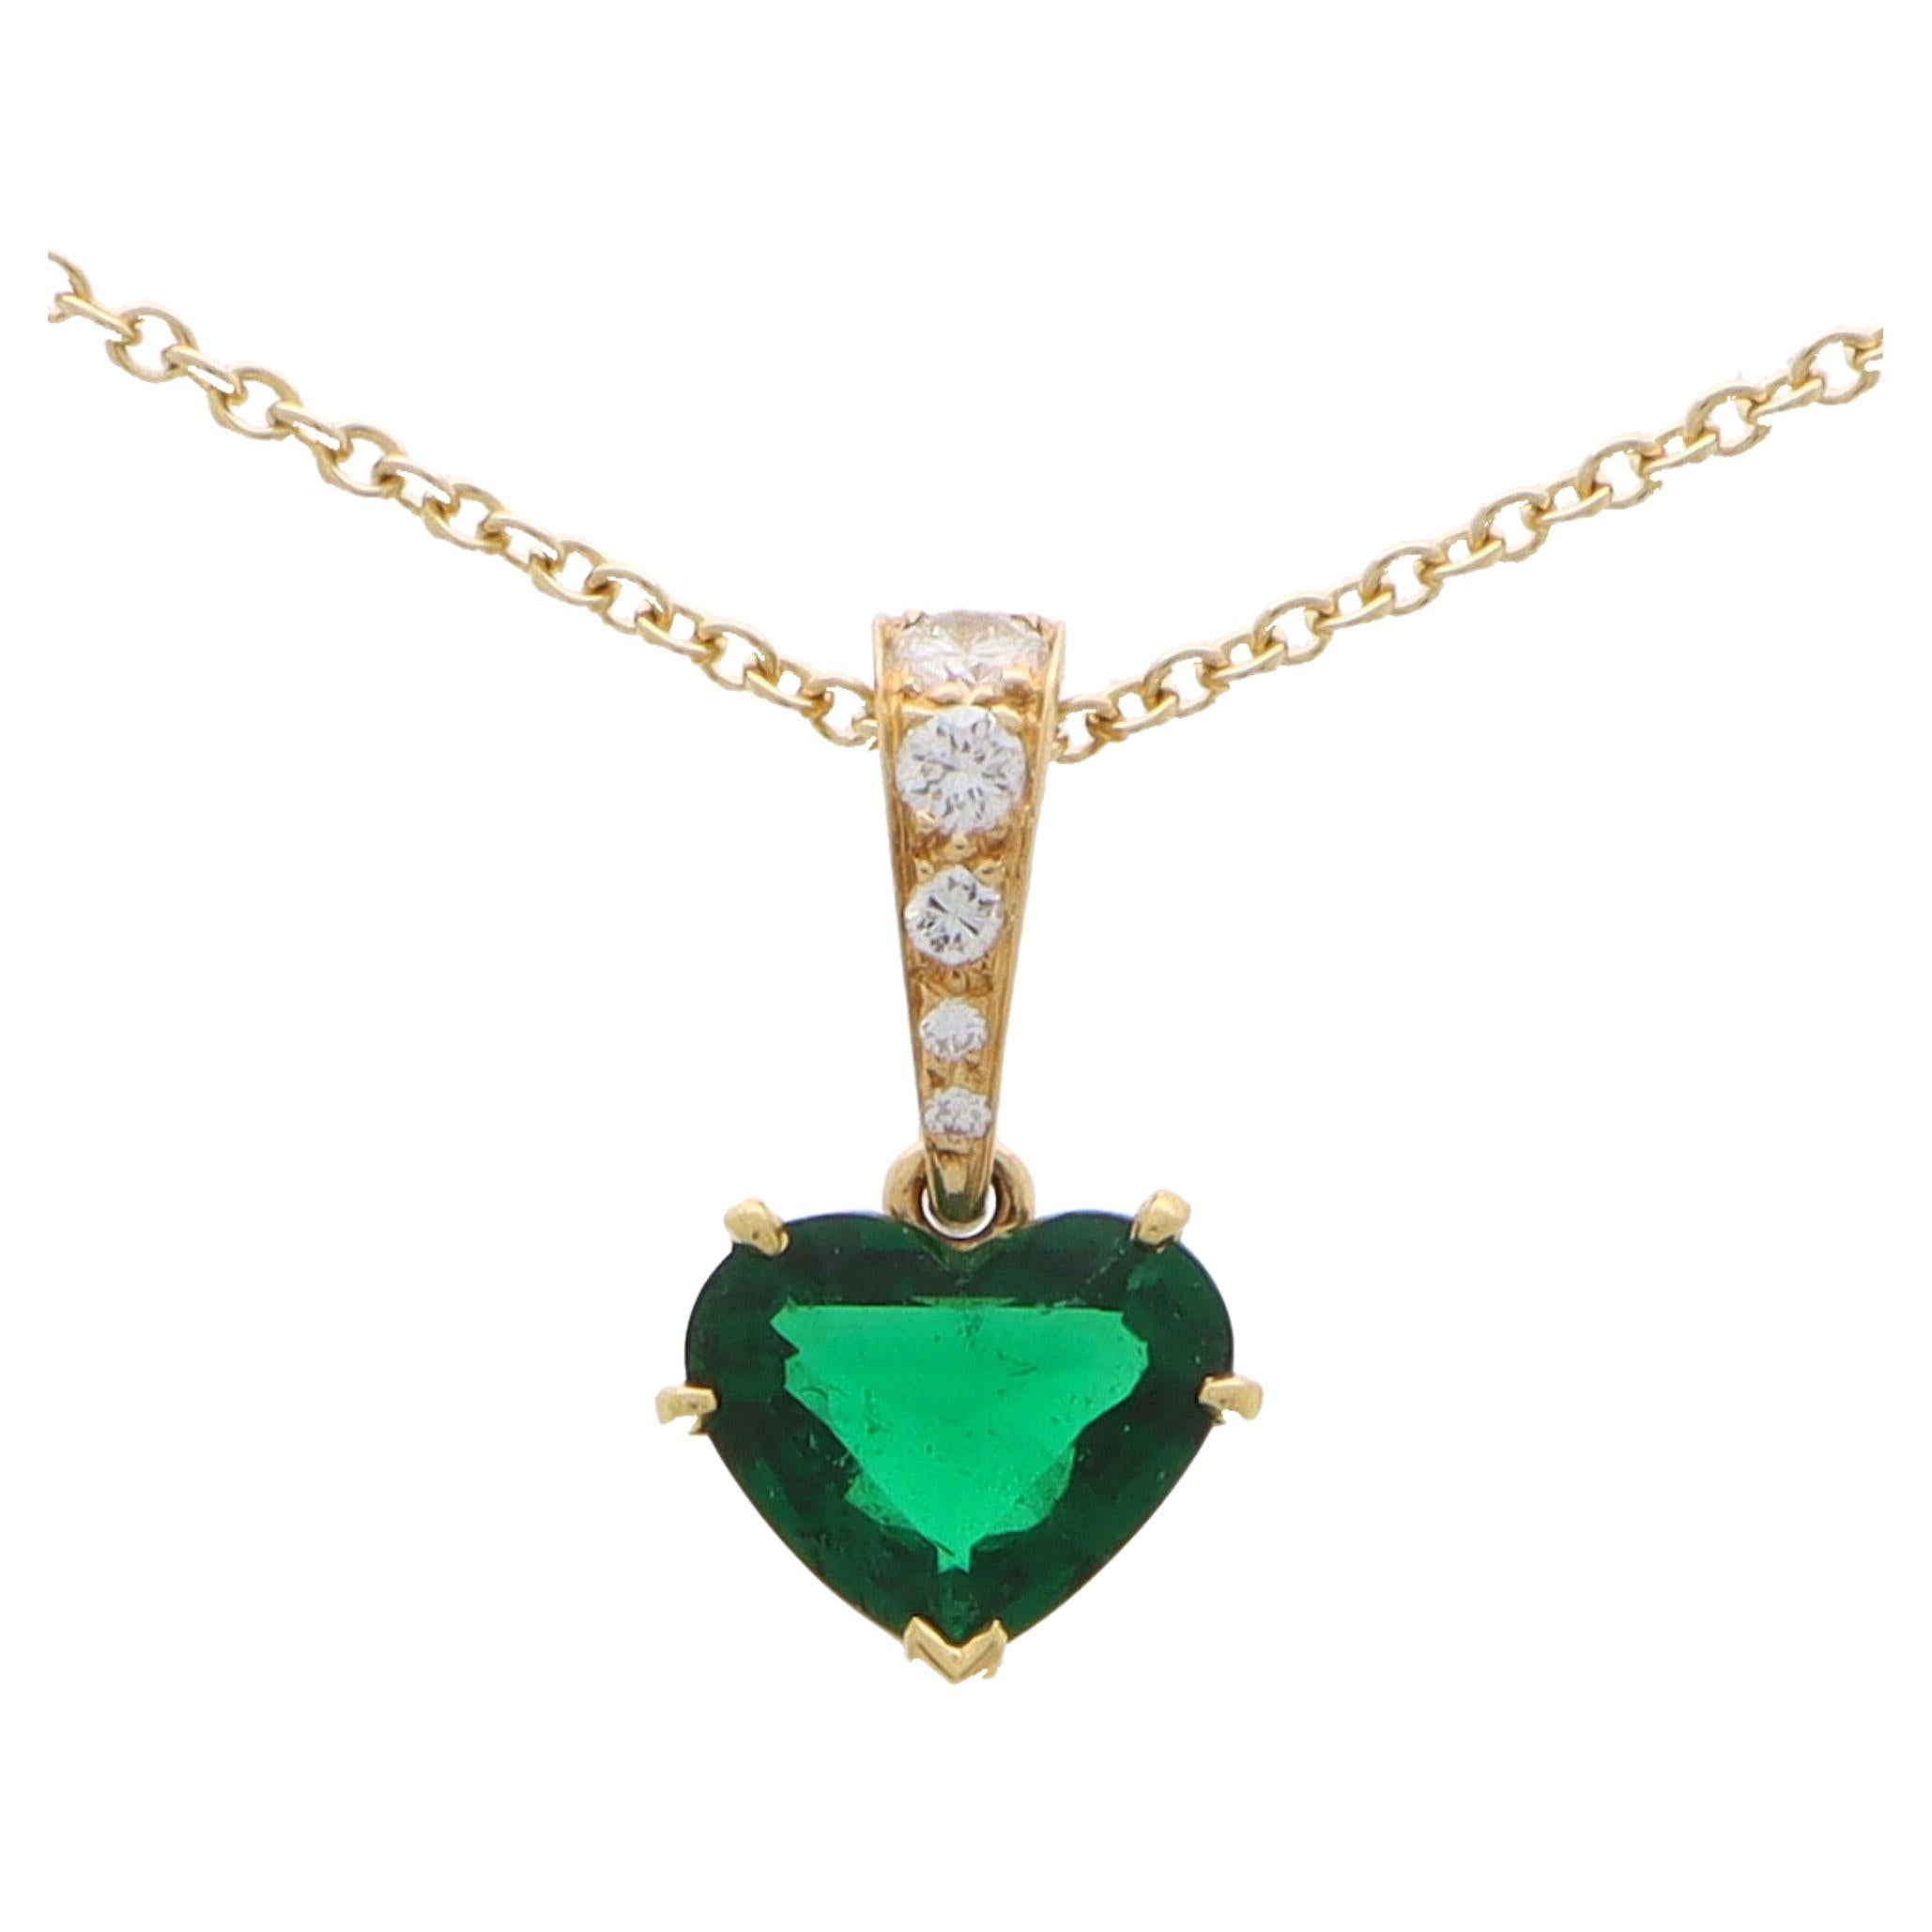 Vintage Cartier Heart Cut Emerald and Diamond Pendant in 18k Yellow Gold